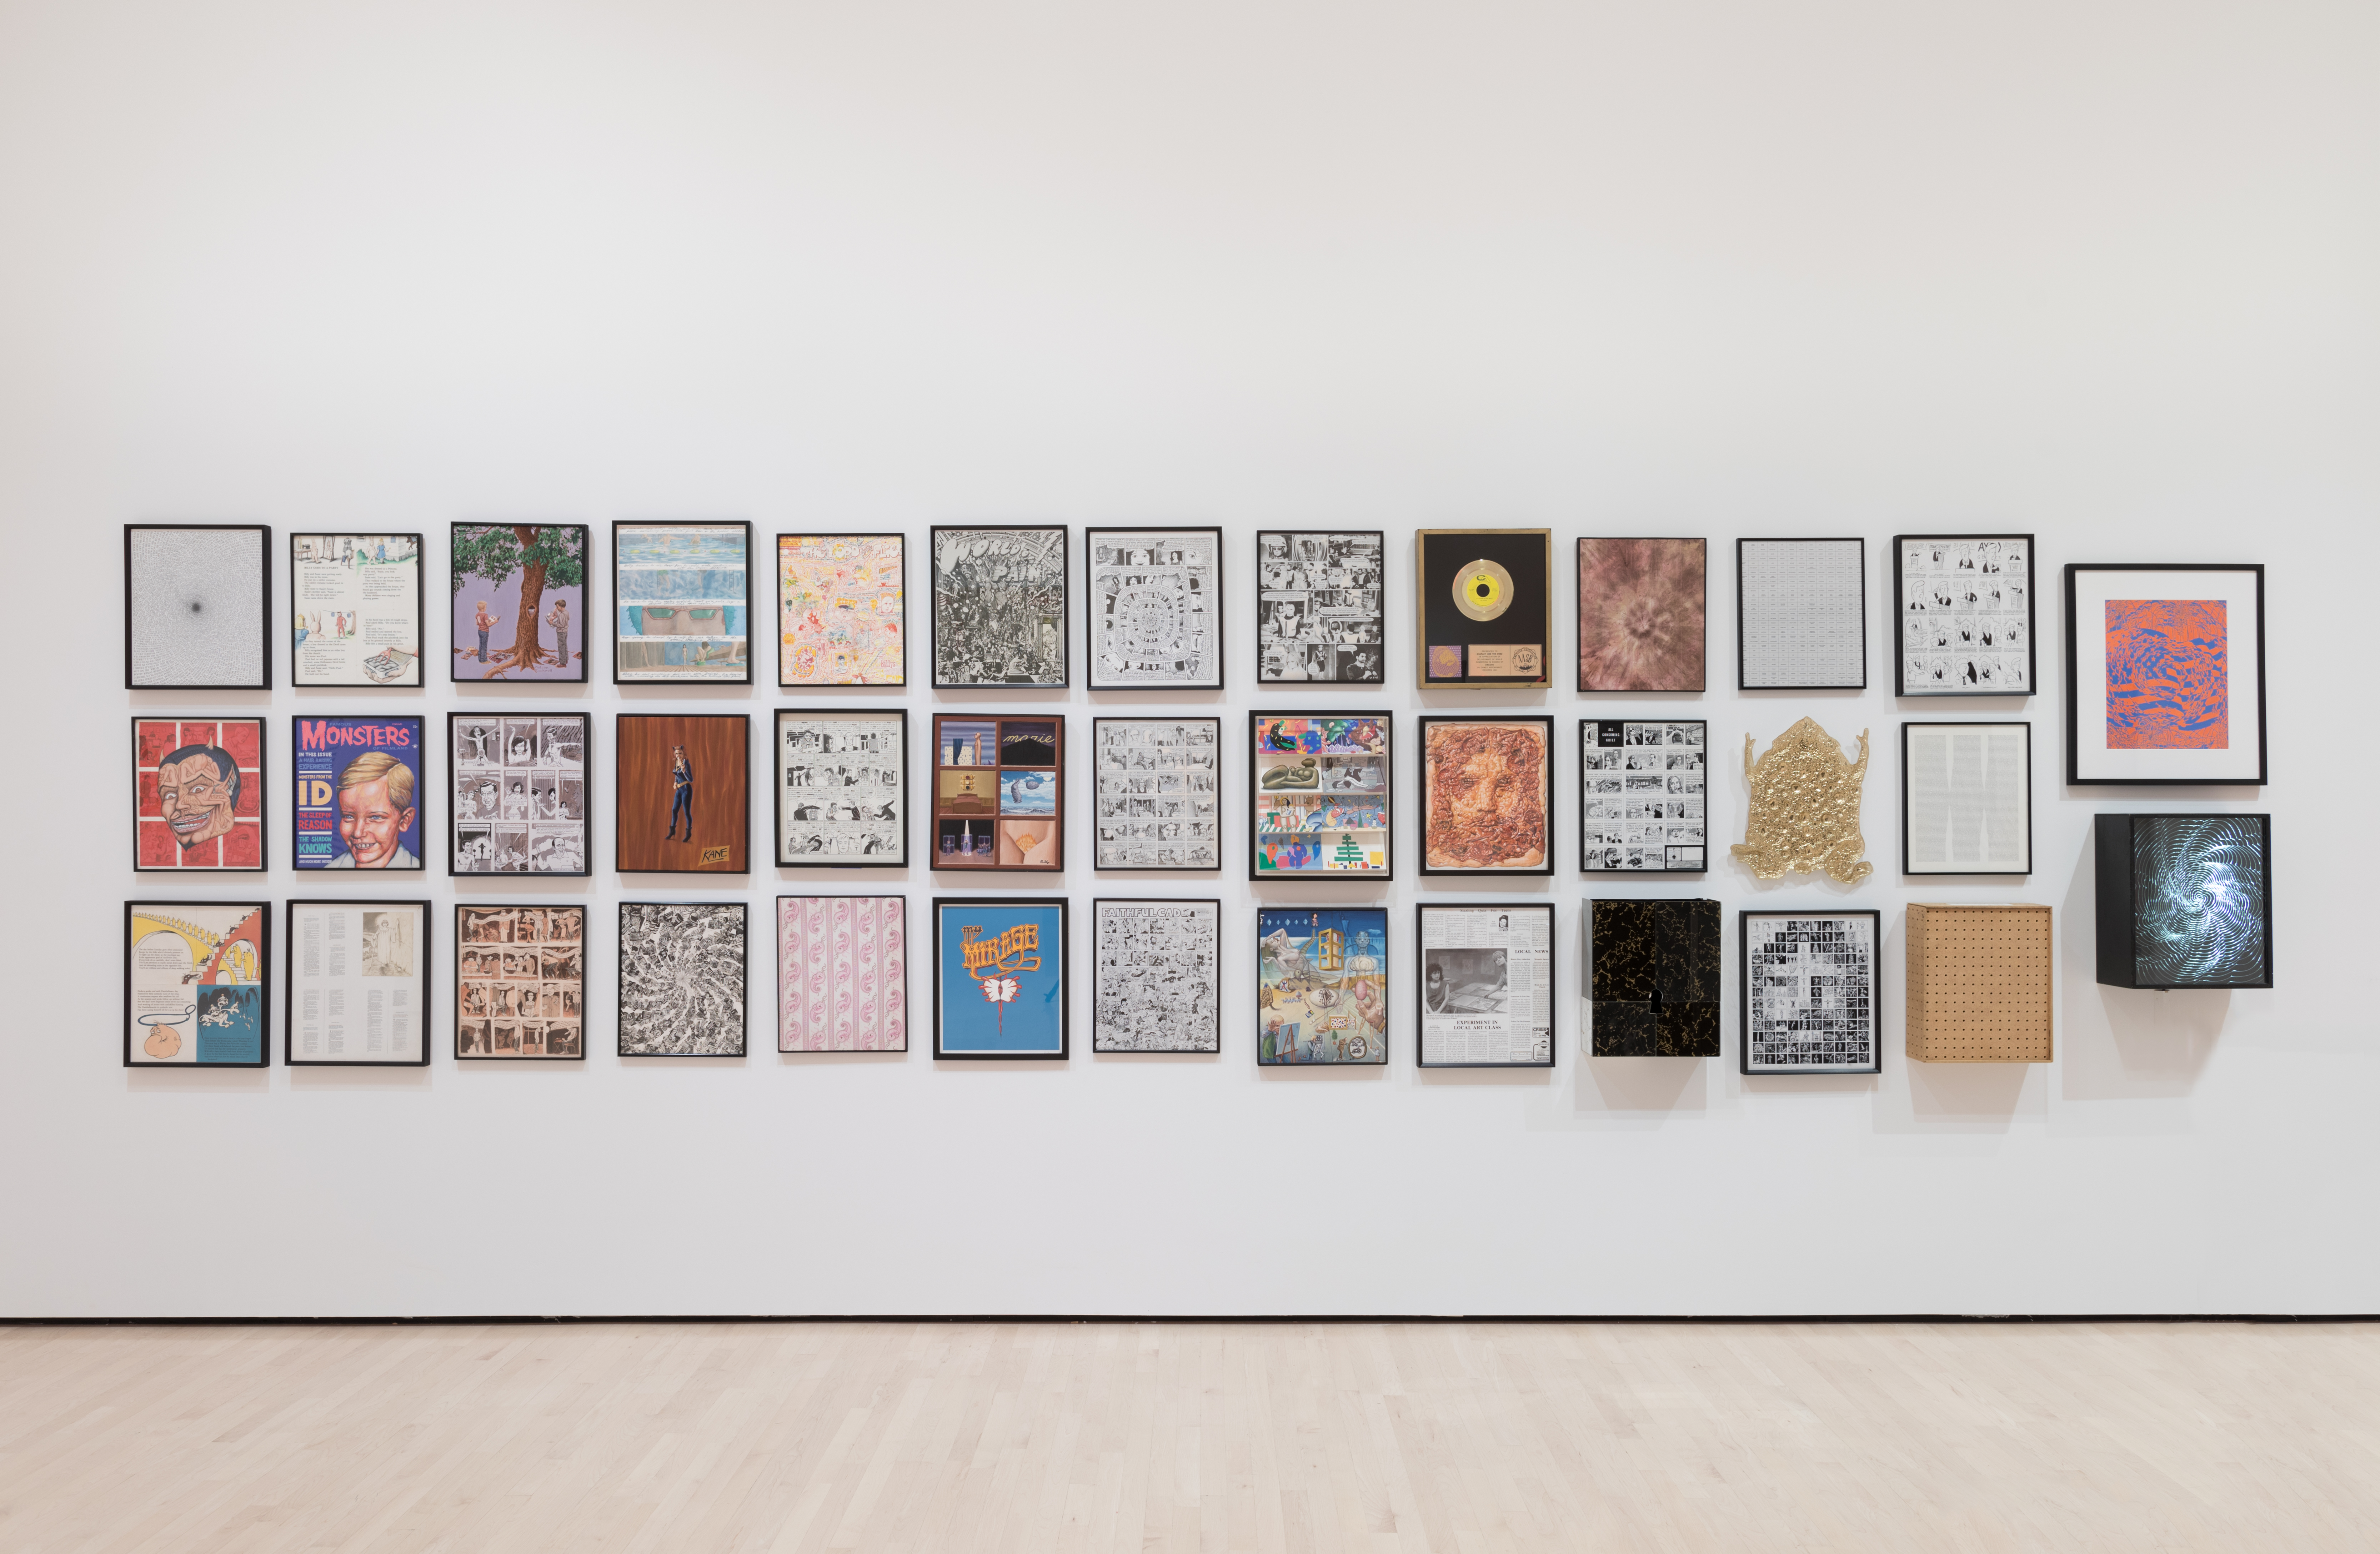 Michigan Stories: Mike Kelley and Jim Shaw, installation view at the MSU Broad, 2017. Photo: Eat Pomegranate Photography